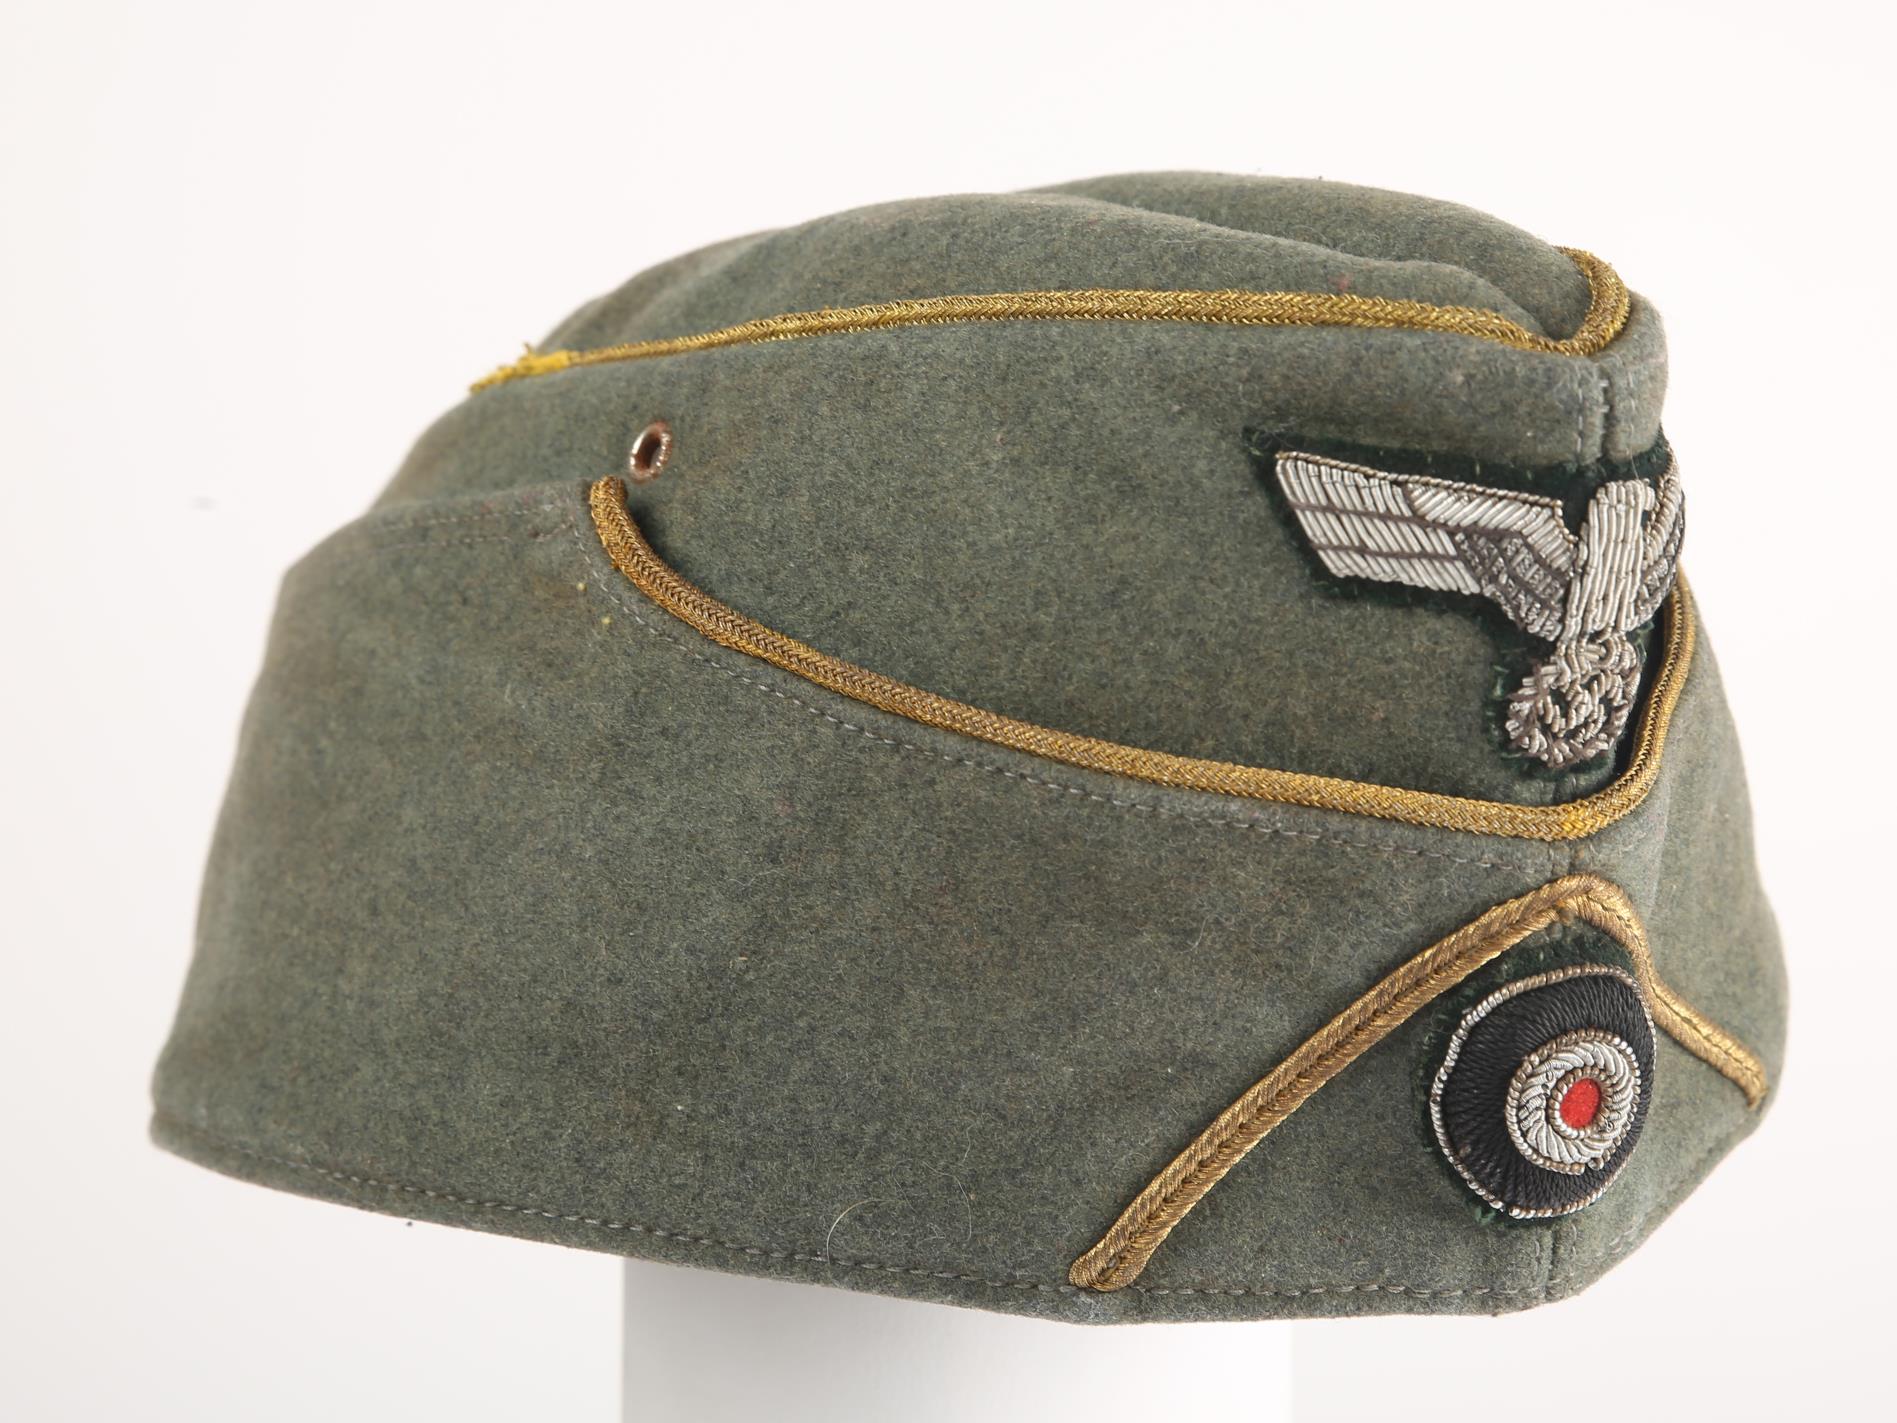 1933-42 German General's side cap. A privately purchased M38 field cap, piped in gilt bullion. - Image 2 of 4